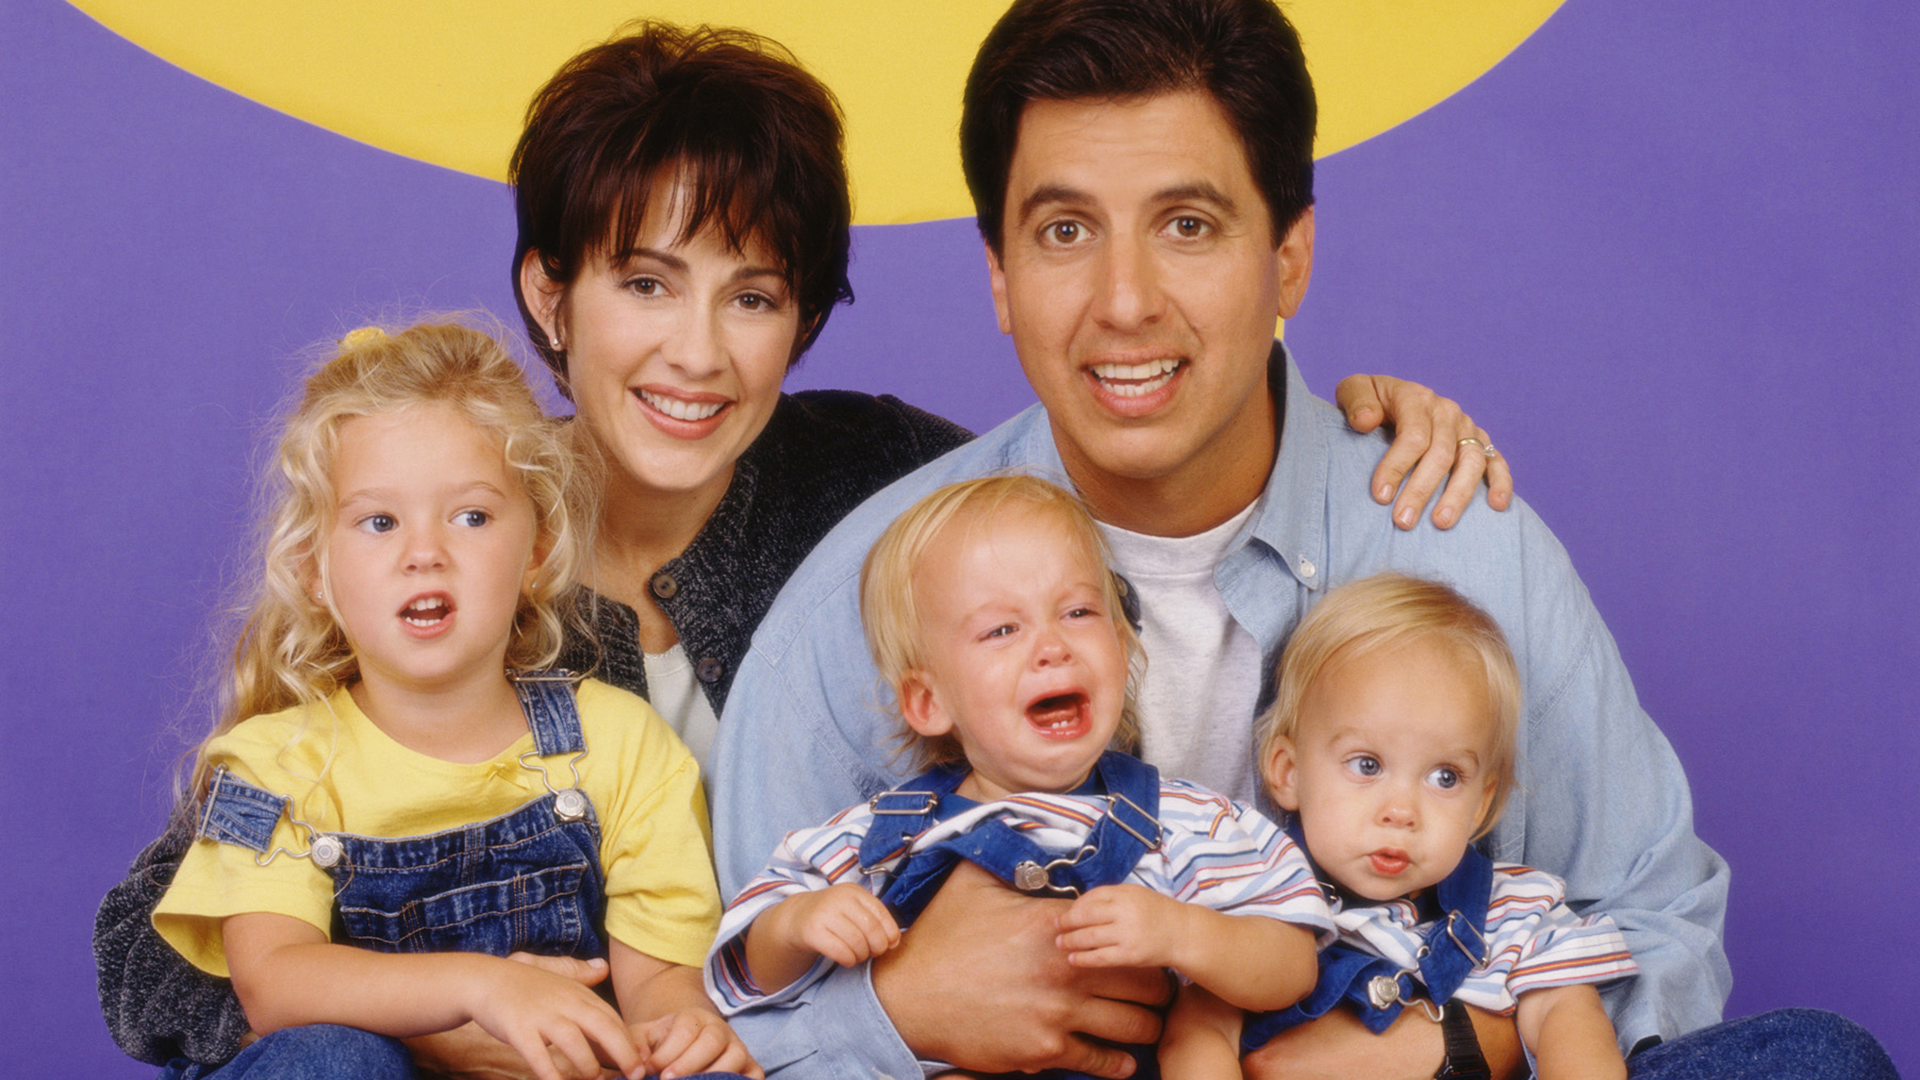 Everybody Loves Raymond Season 7 Episode 11 - The Thought That Counts